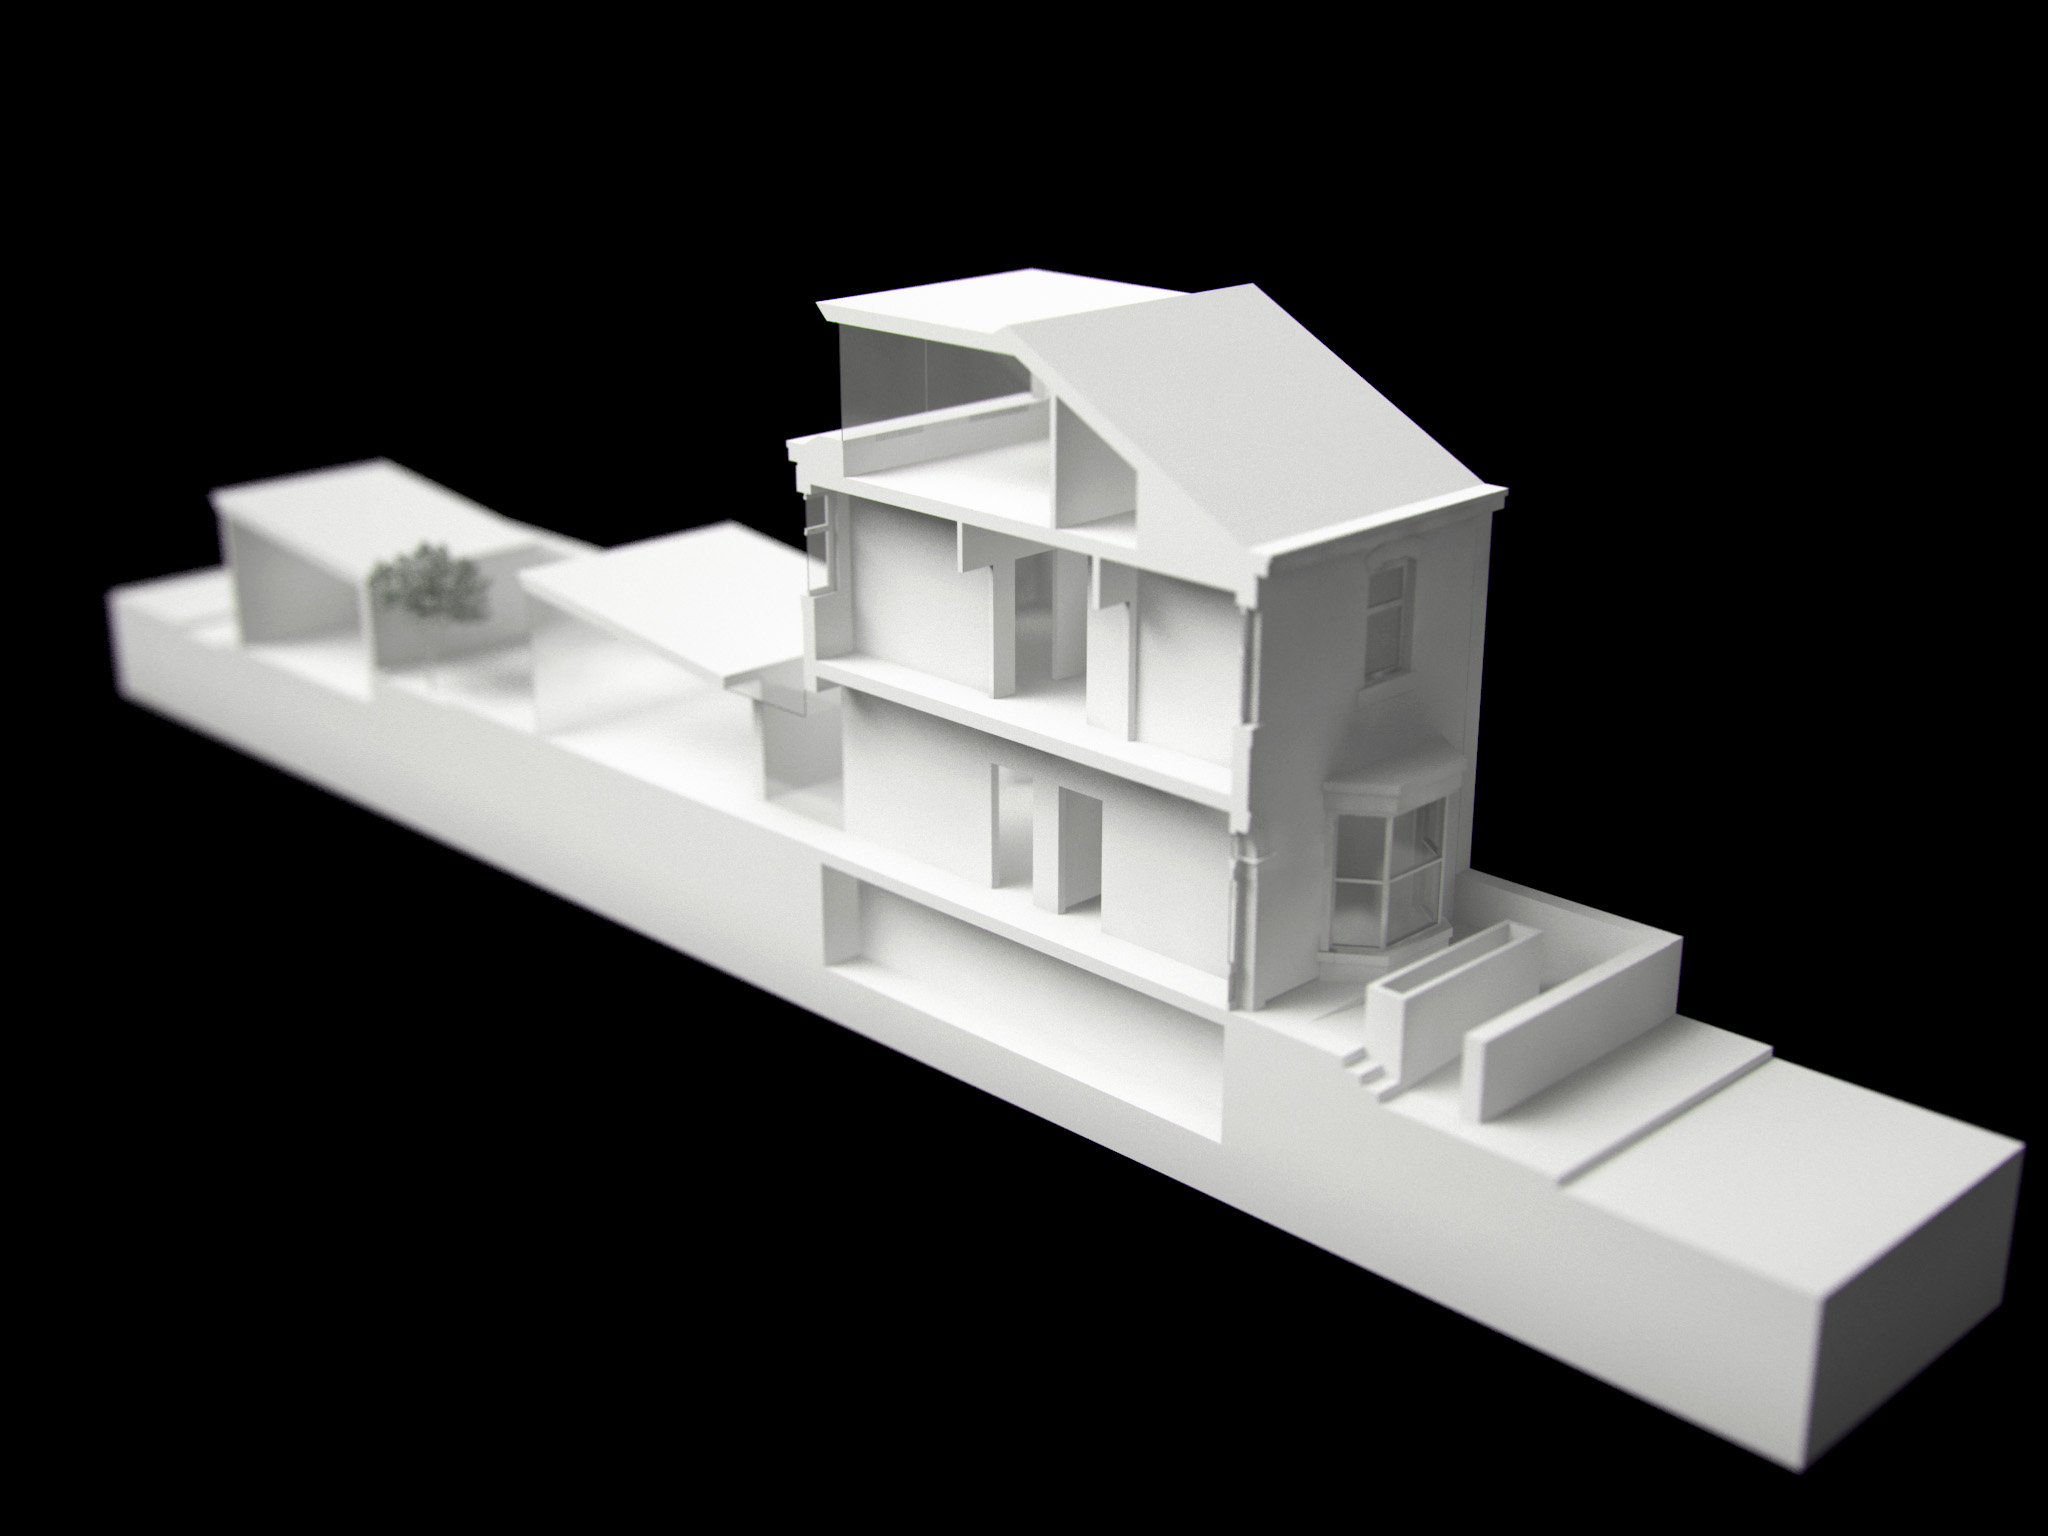 Physical Model Cross Section 1